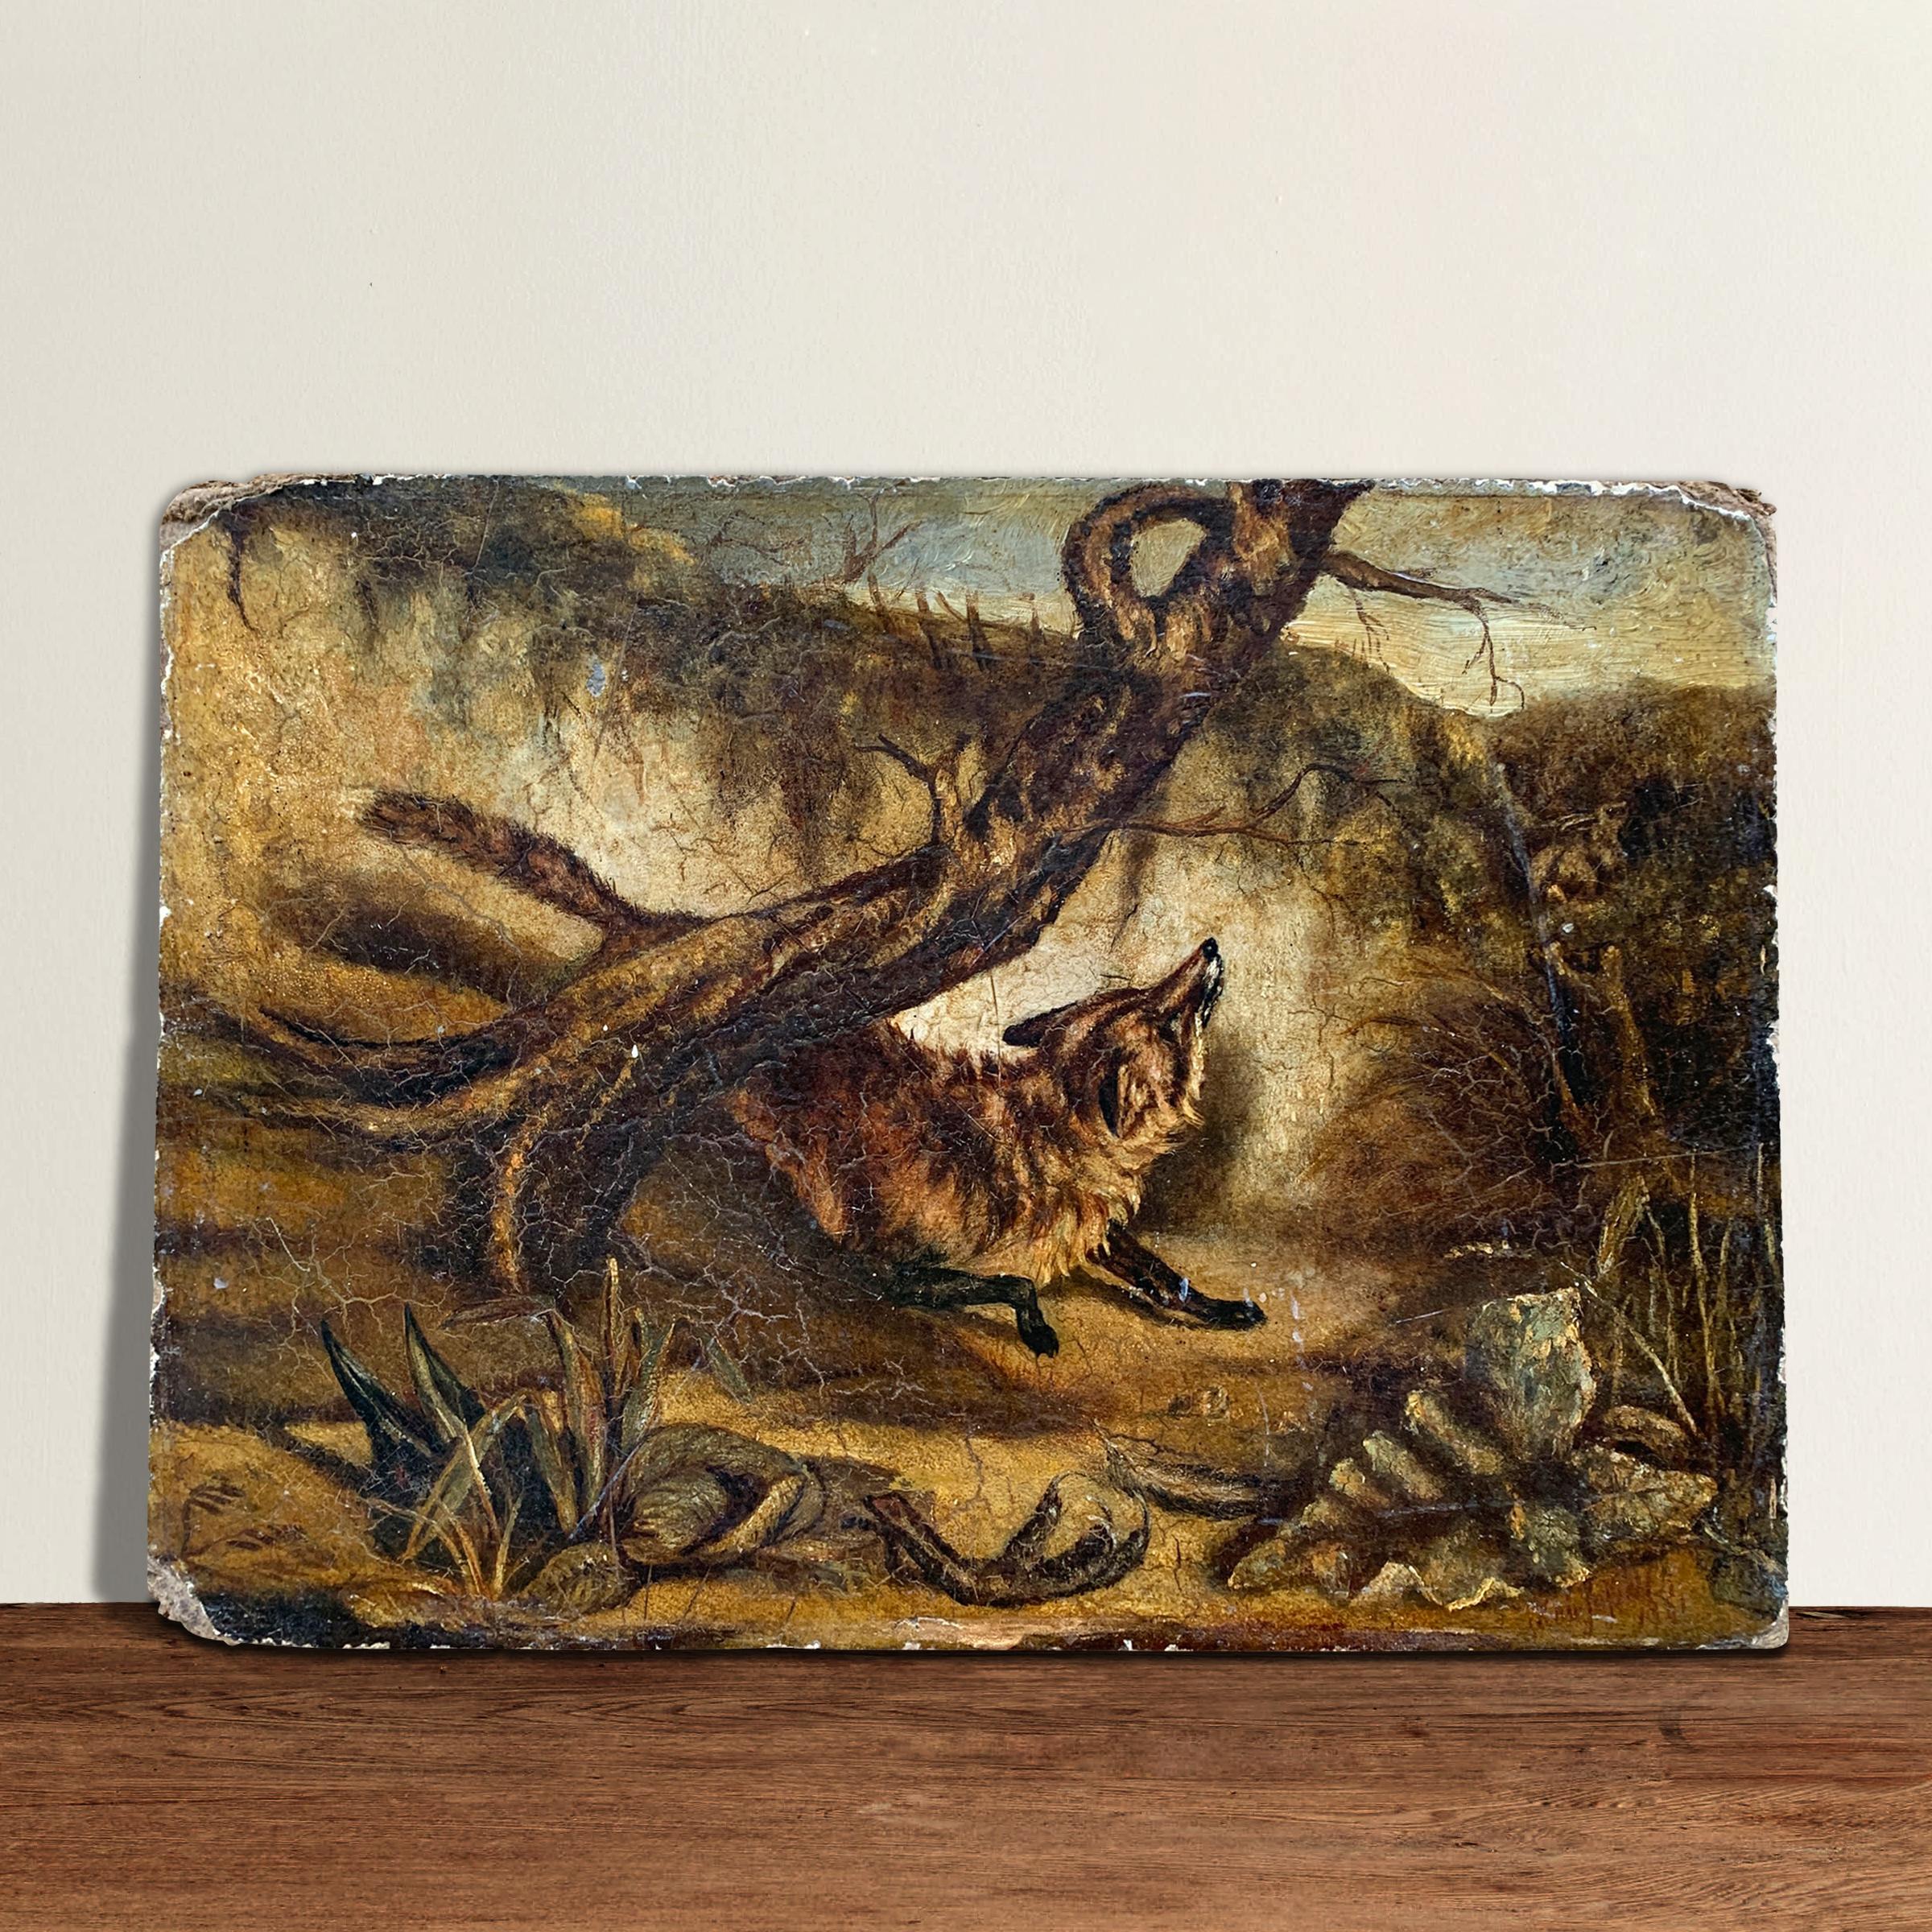 An alluring early 20th century oil on board painting depicting a fox in a hollow, with a dead crow in the foreground. Signed in pencil illegibly on the reverse.